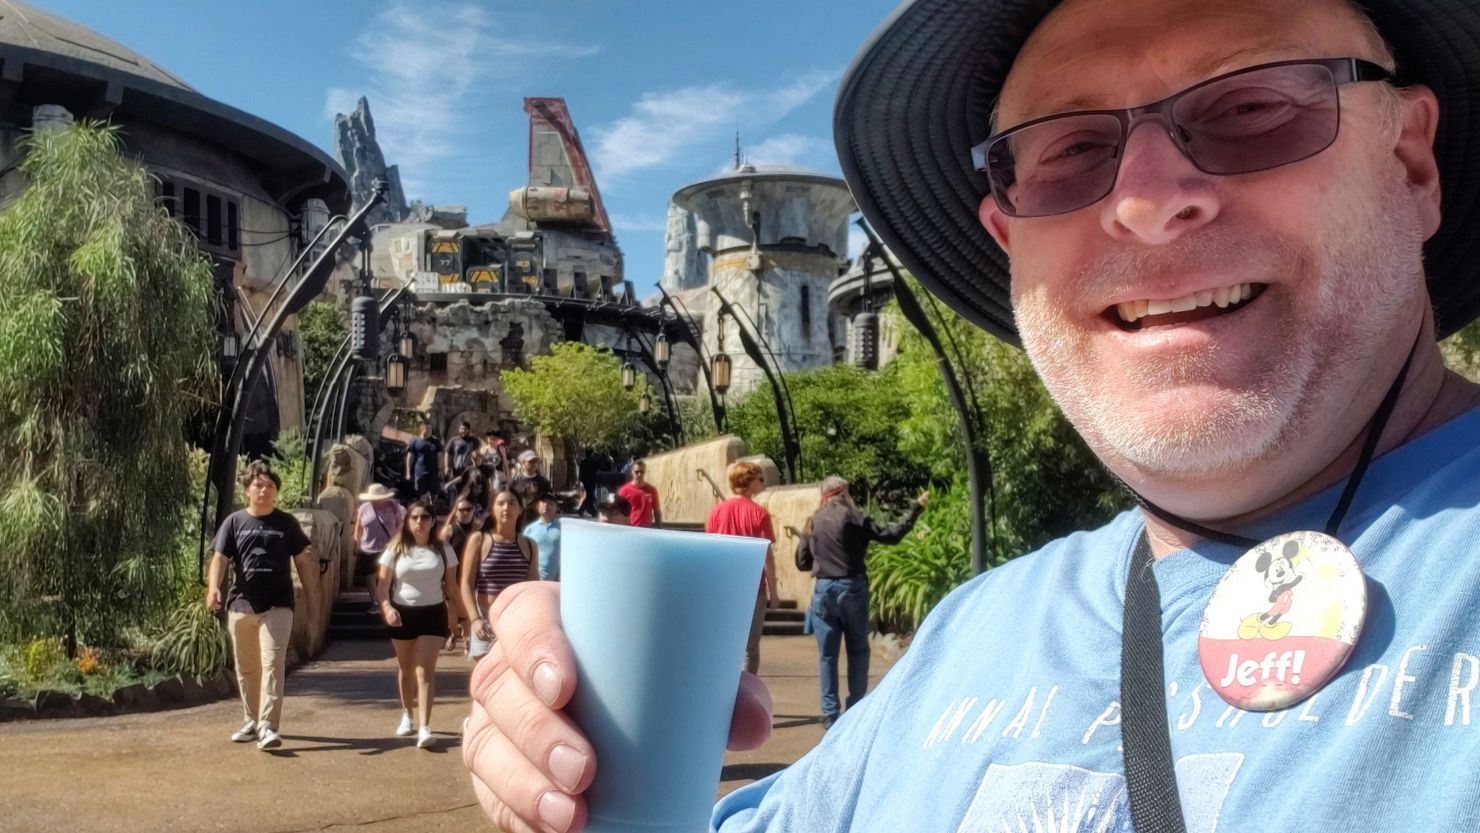 Did You Know Single Men Cannot Enter This Theme Park? - Inside the Magic